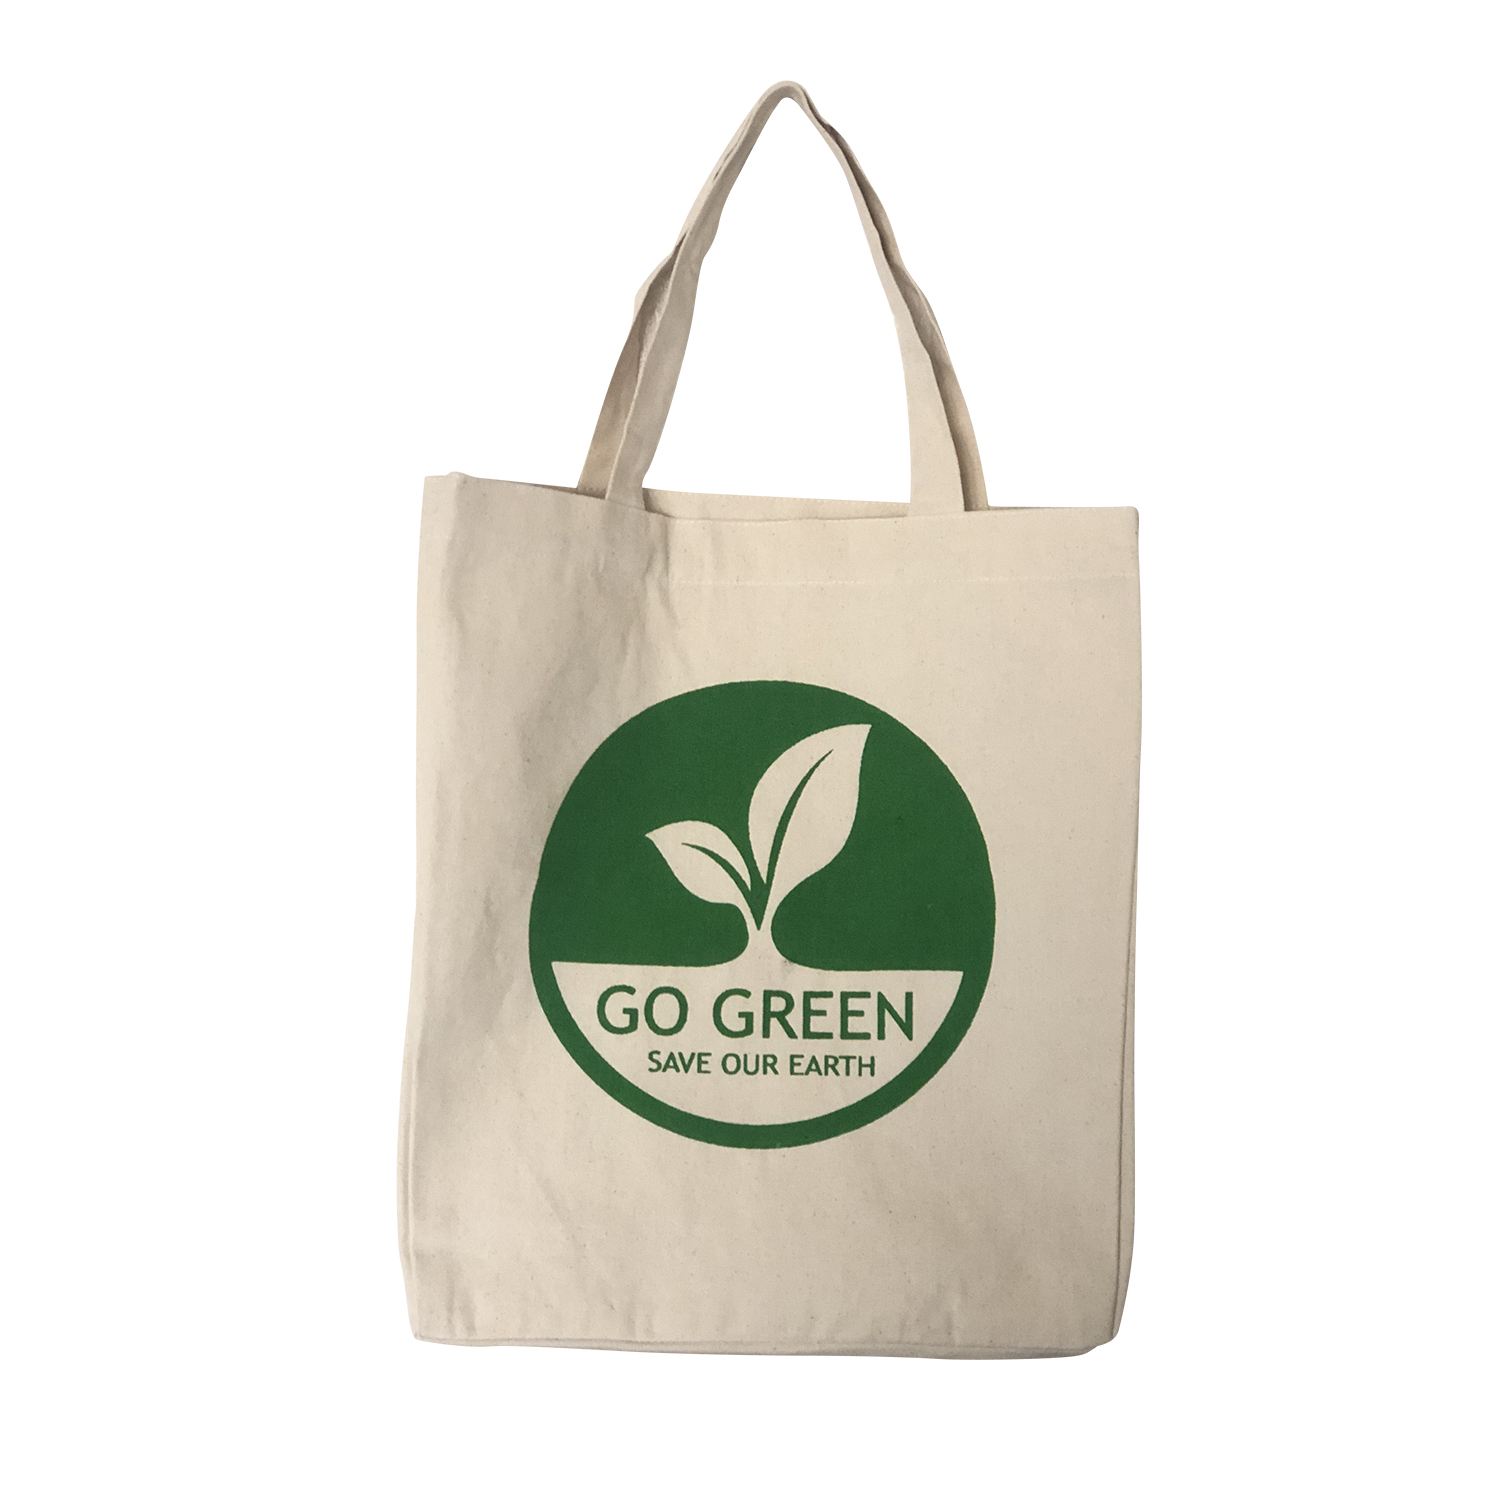 Denby Fawcett: Reusable Tote Bags Aren't As Environmentally Friendly As You  Think - Honolulu Civil Beat